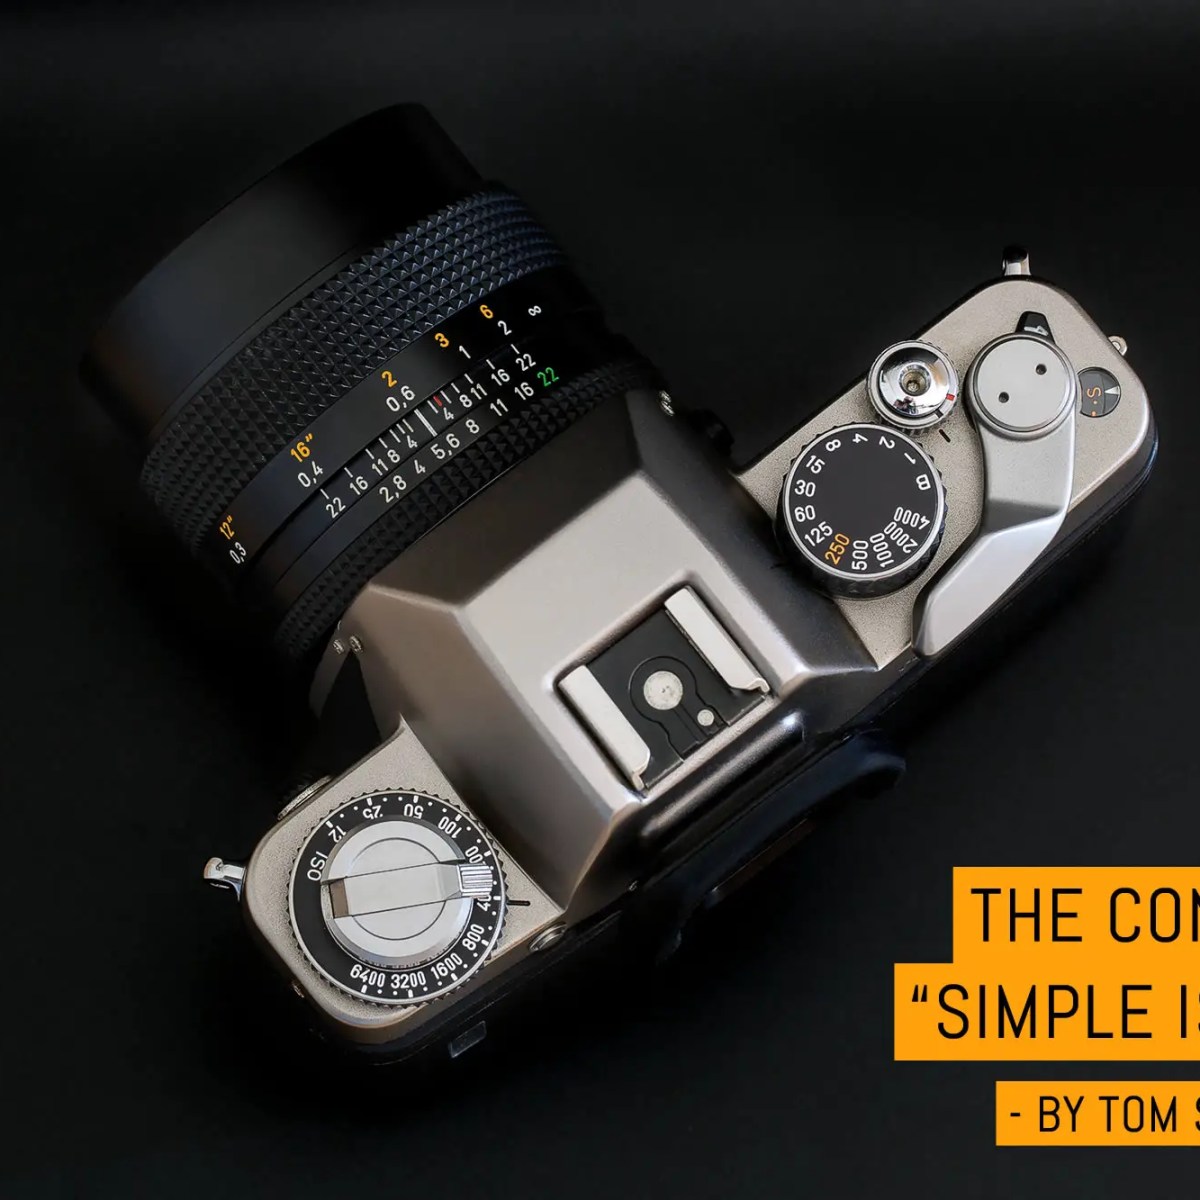 Camera review- the Contax S2, "Simple is Best" - by Tom Sebastiano